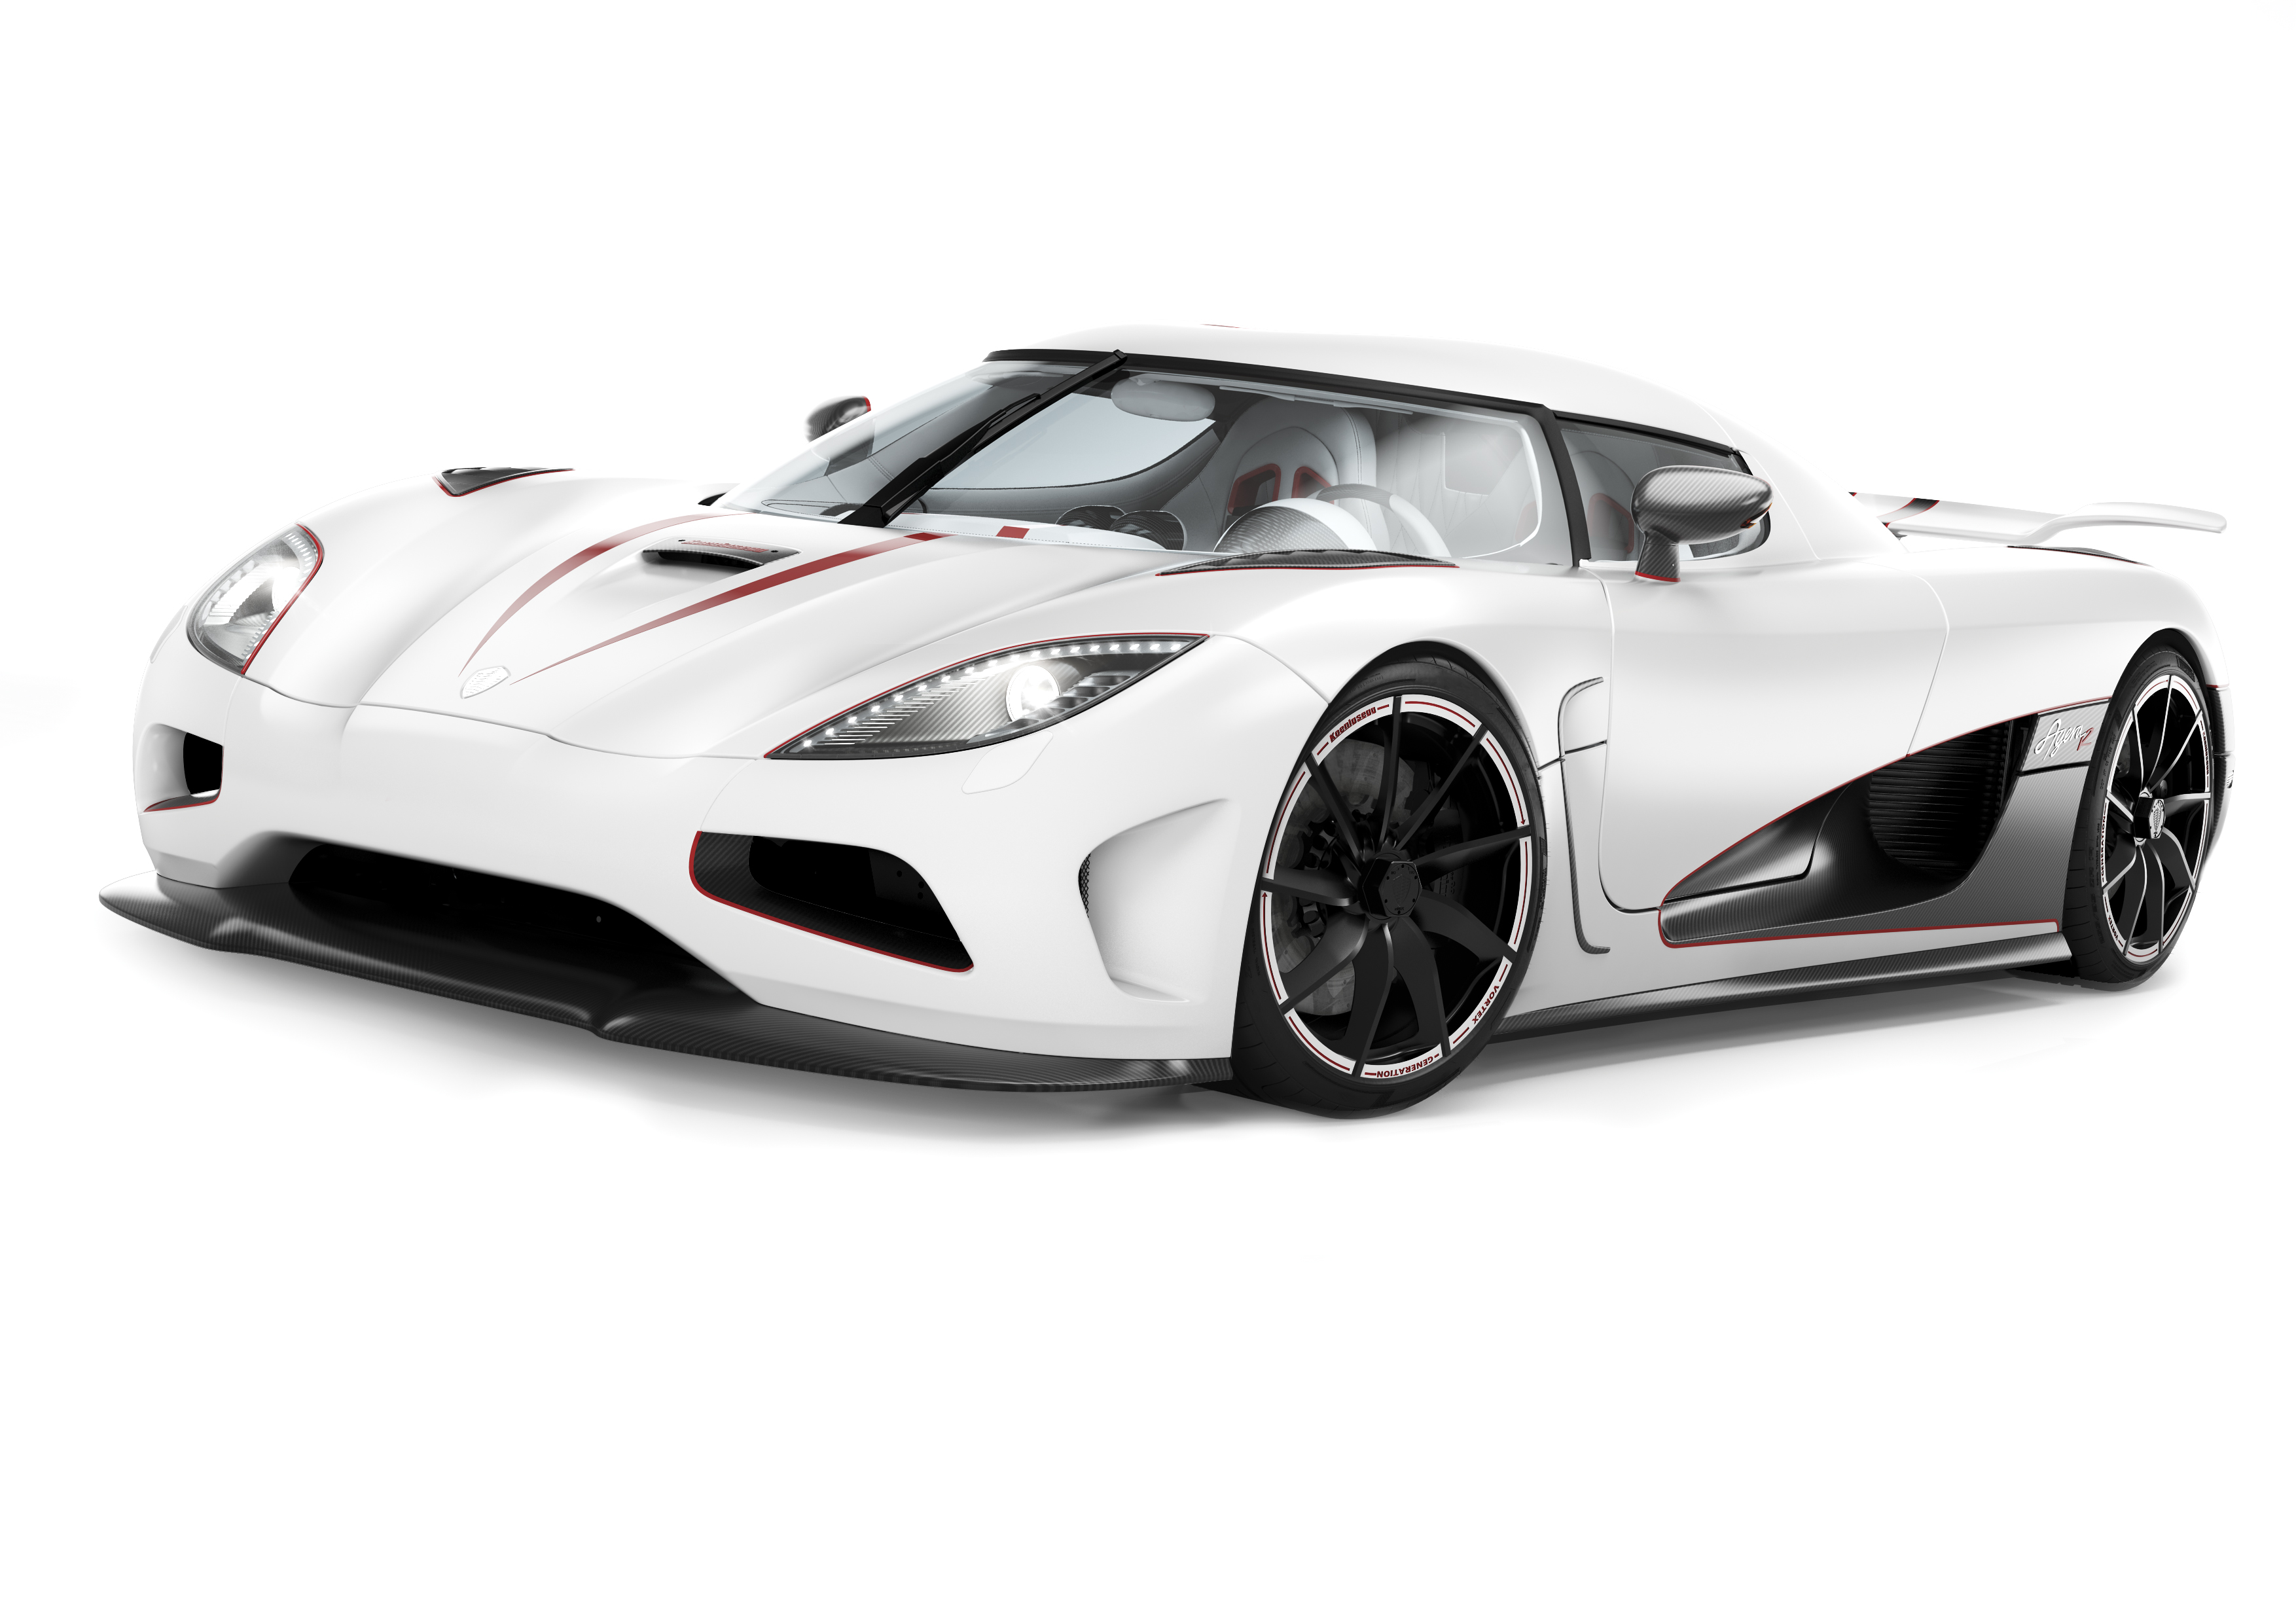 Koenigsegg Agera Backgrounds, Compatible - PC, Mobile, Gadgets| 3508x2481 px